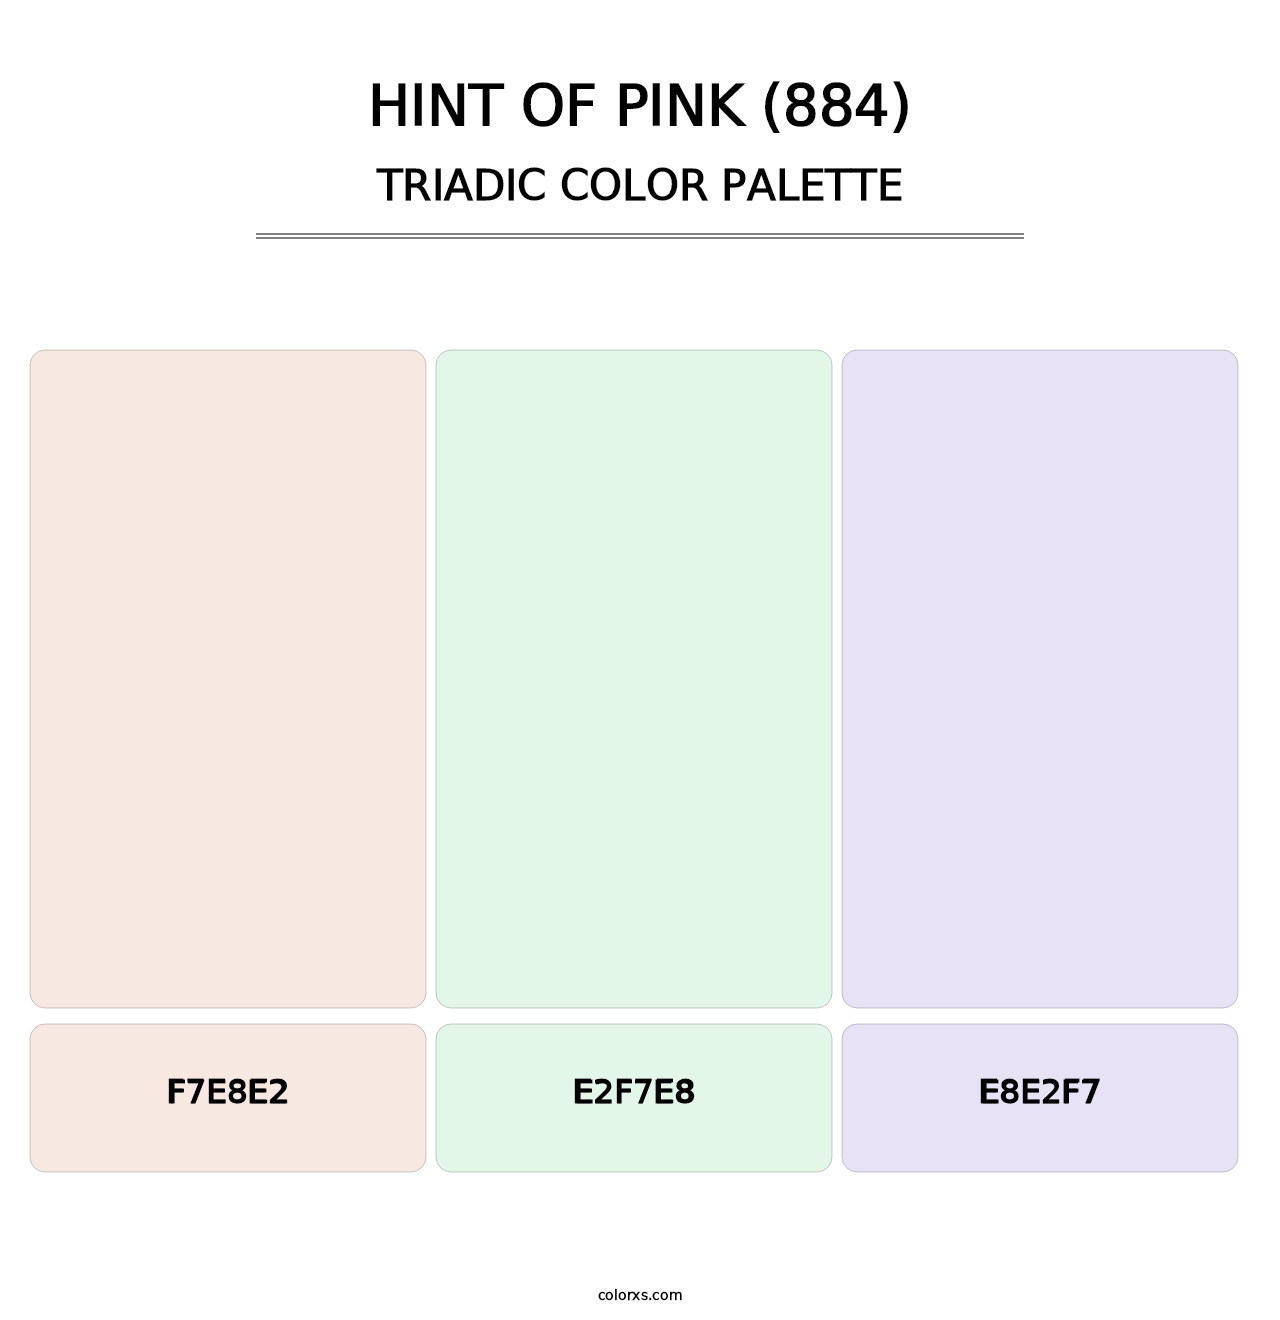 Hint of Pink (884) - Triadic Color Palette